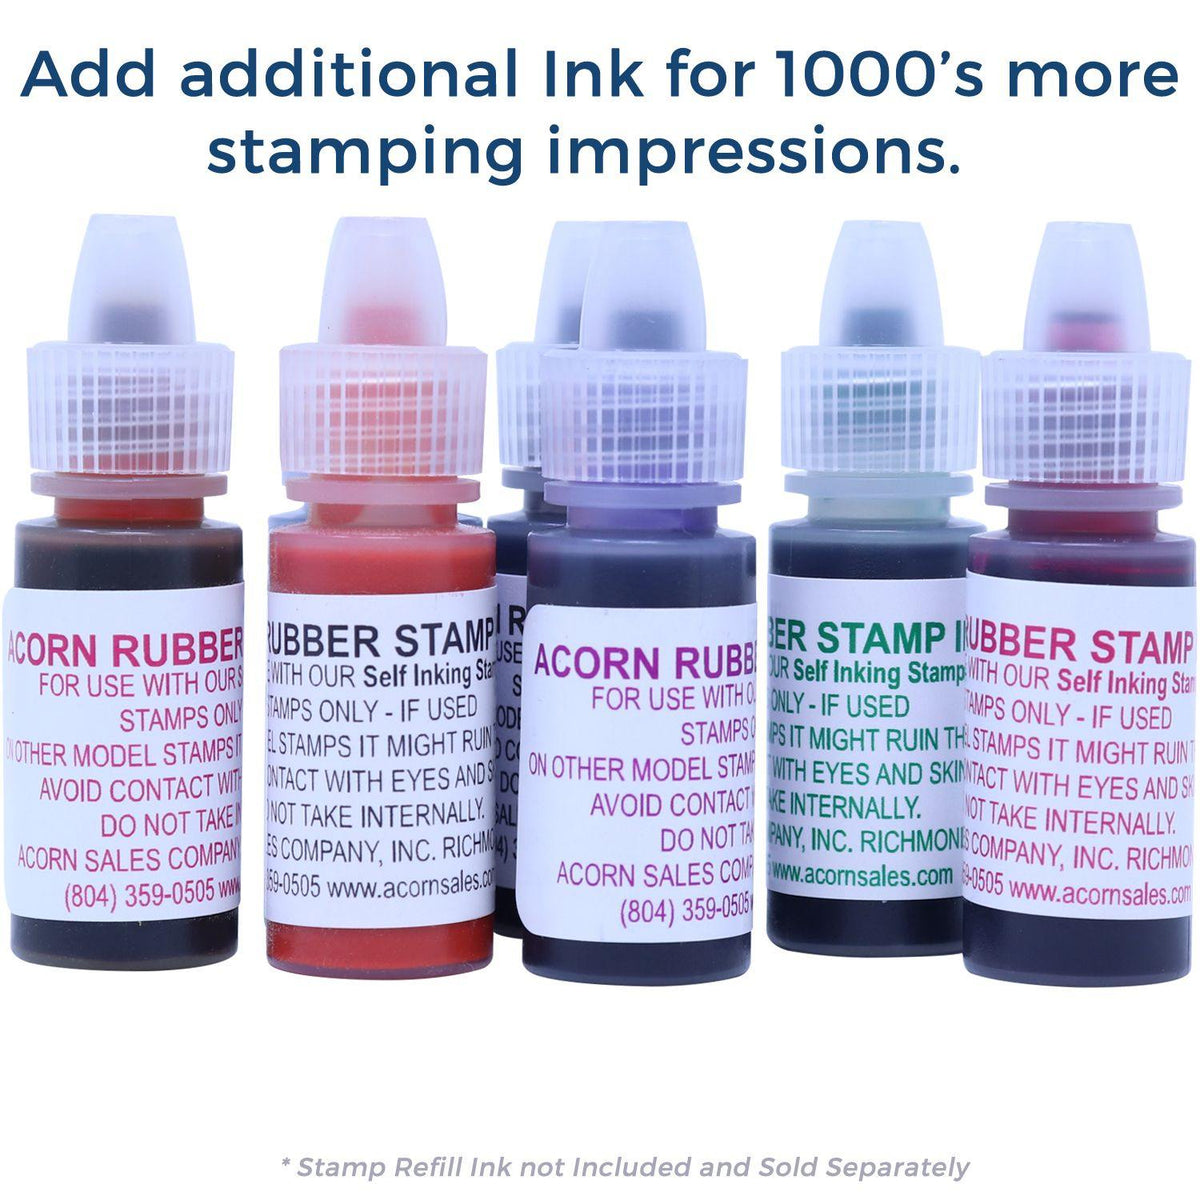 Refill Inks for Large Pre-Inked Economy Rate Stamp Available